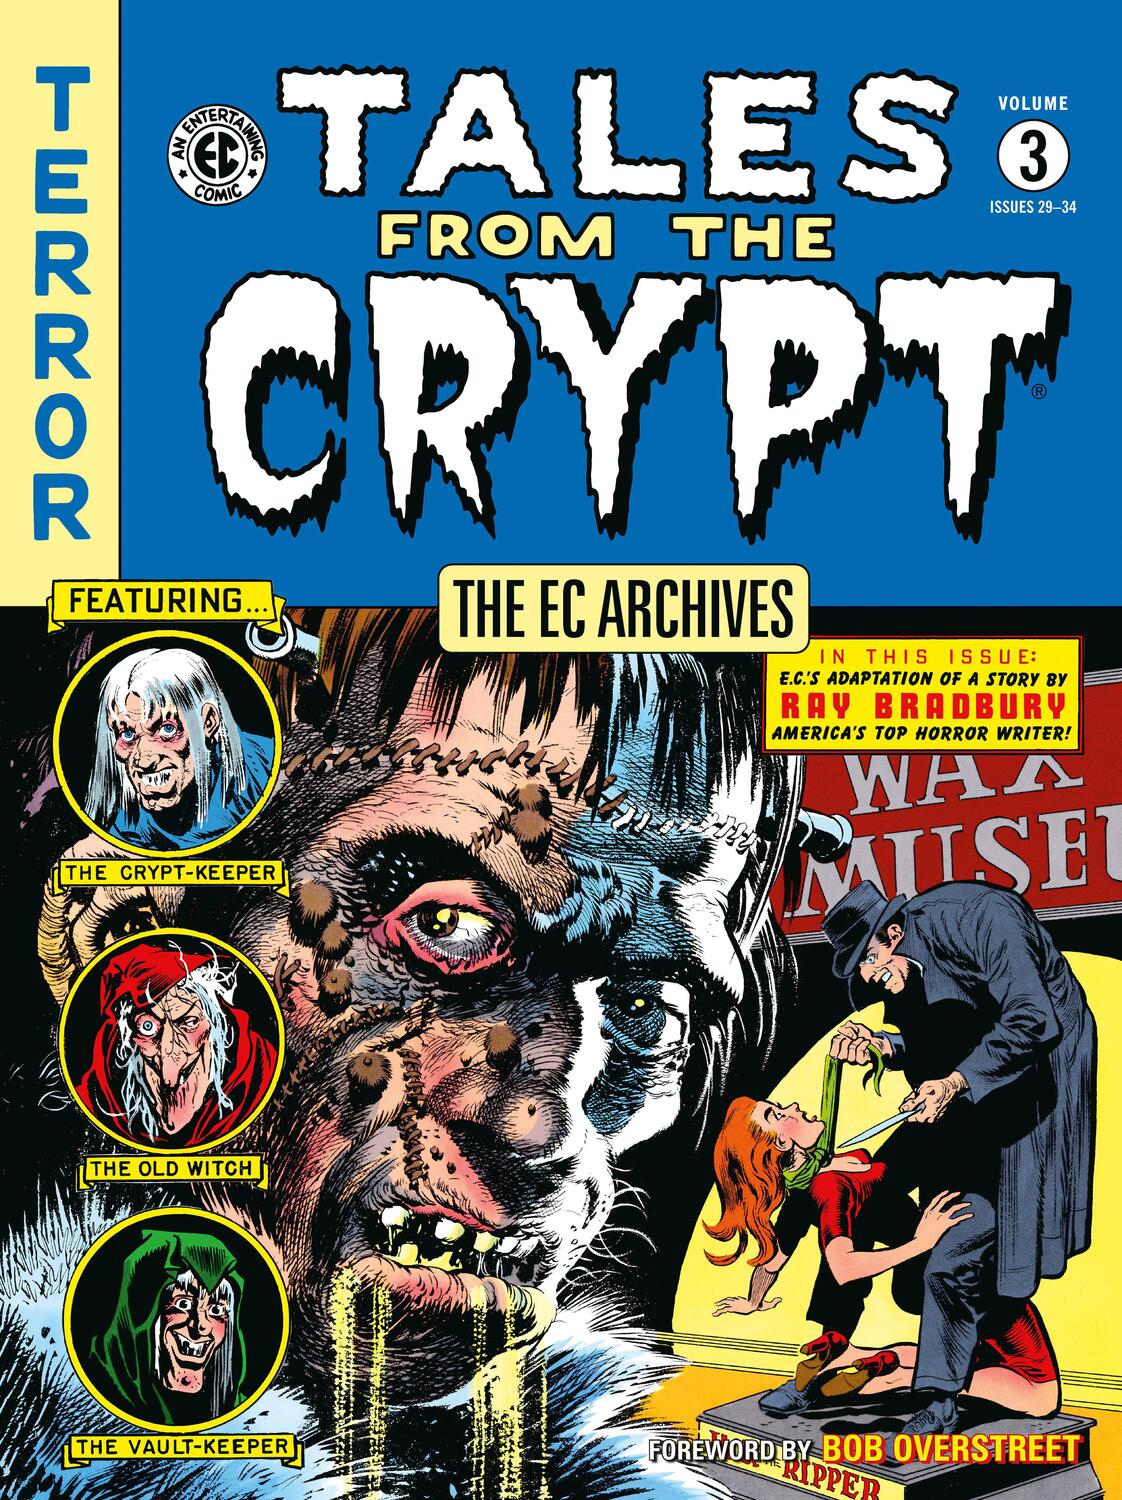 Cover: 9781506732398 | The EC Archives: Tales from the Crypt Volume 3 | Al Feldstein (u. a.)